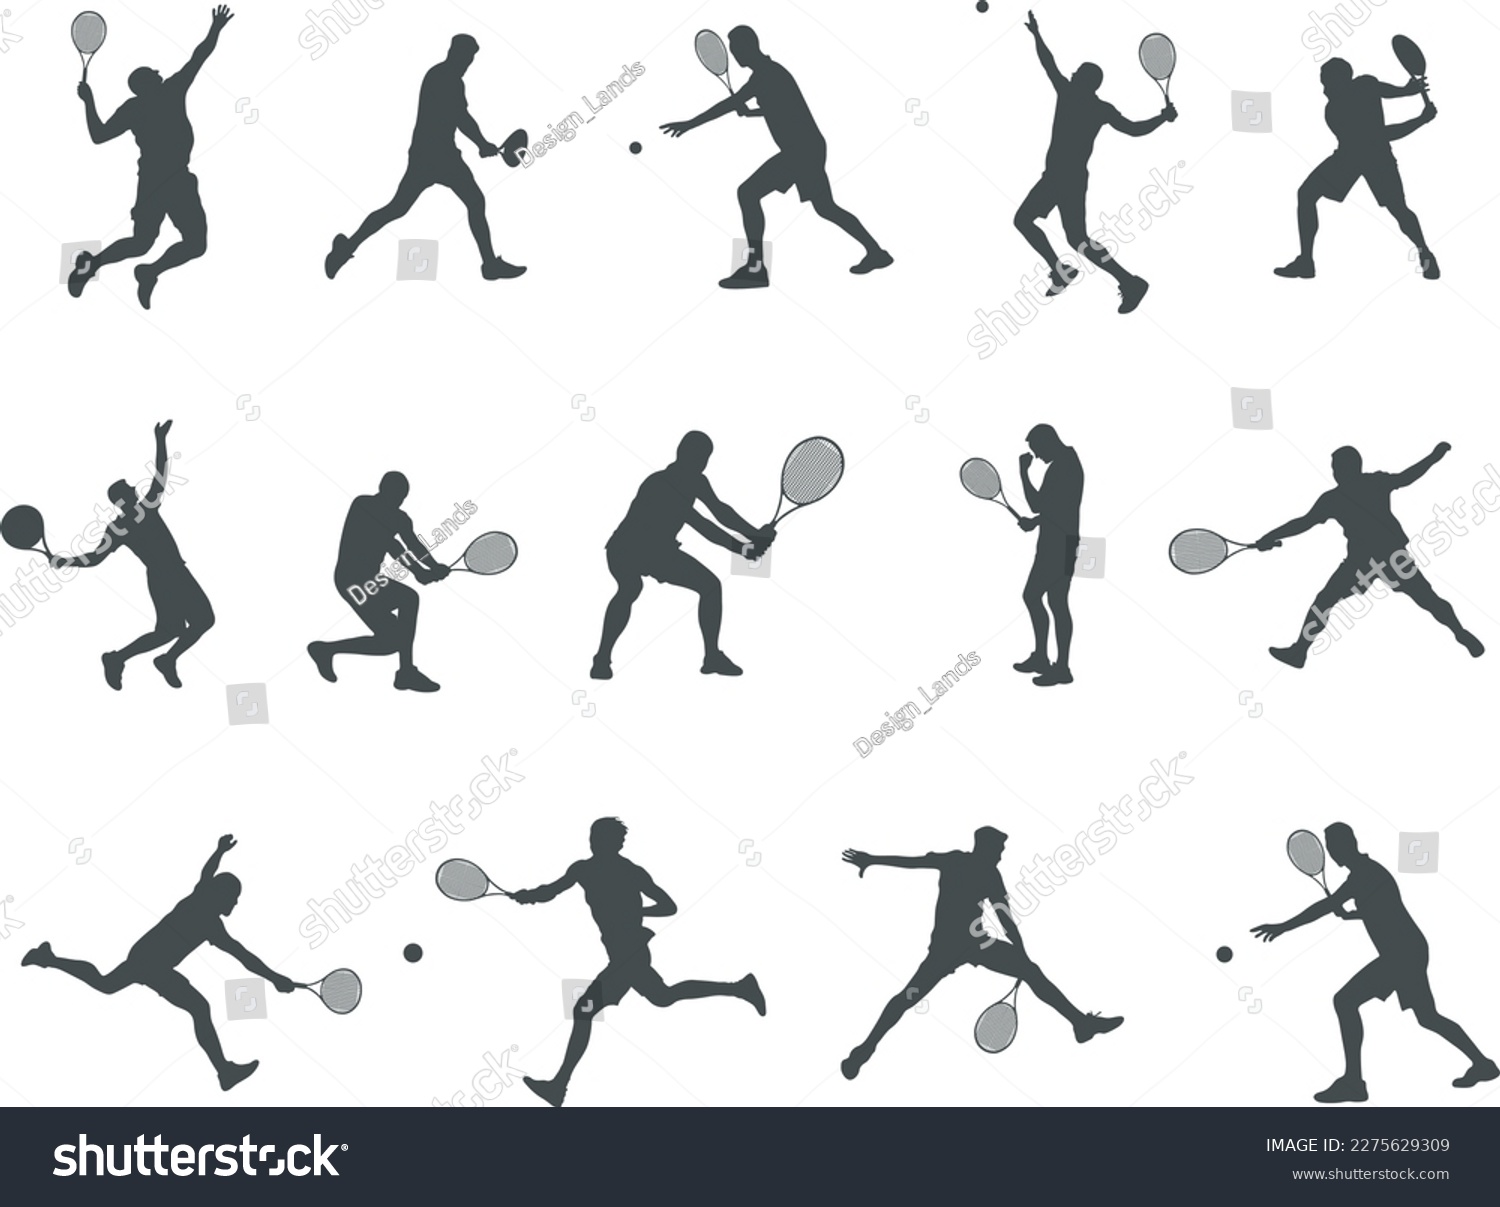 SVG of Male tennis player silhouettes, Tennis player silhouette, Man tennis player vector, Tennis player SVG svg